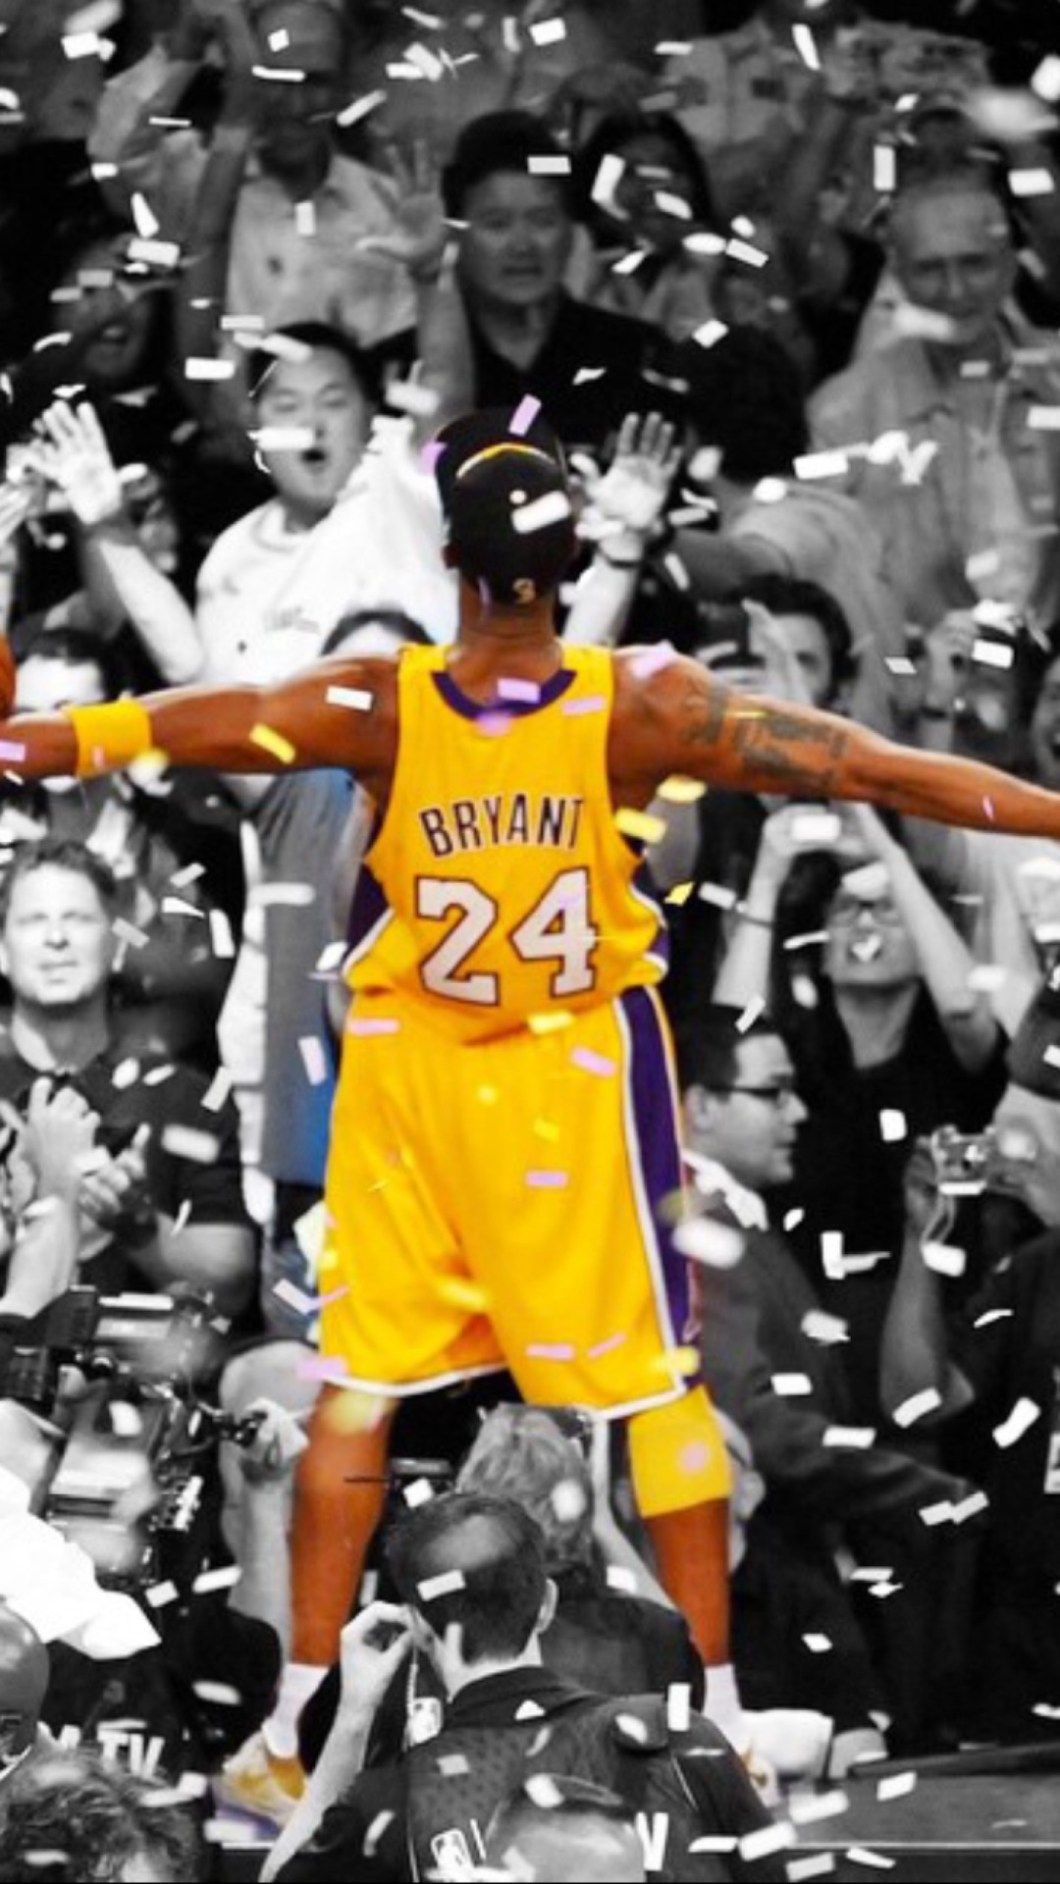 25 Rip Kobe Bryant and Gigi wallpapers ideas in 2023  kobe bryant kobe  bryant